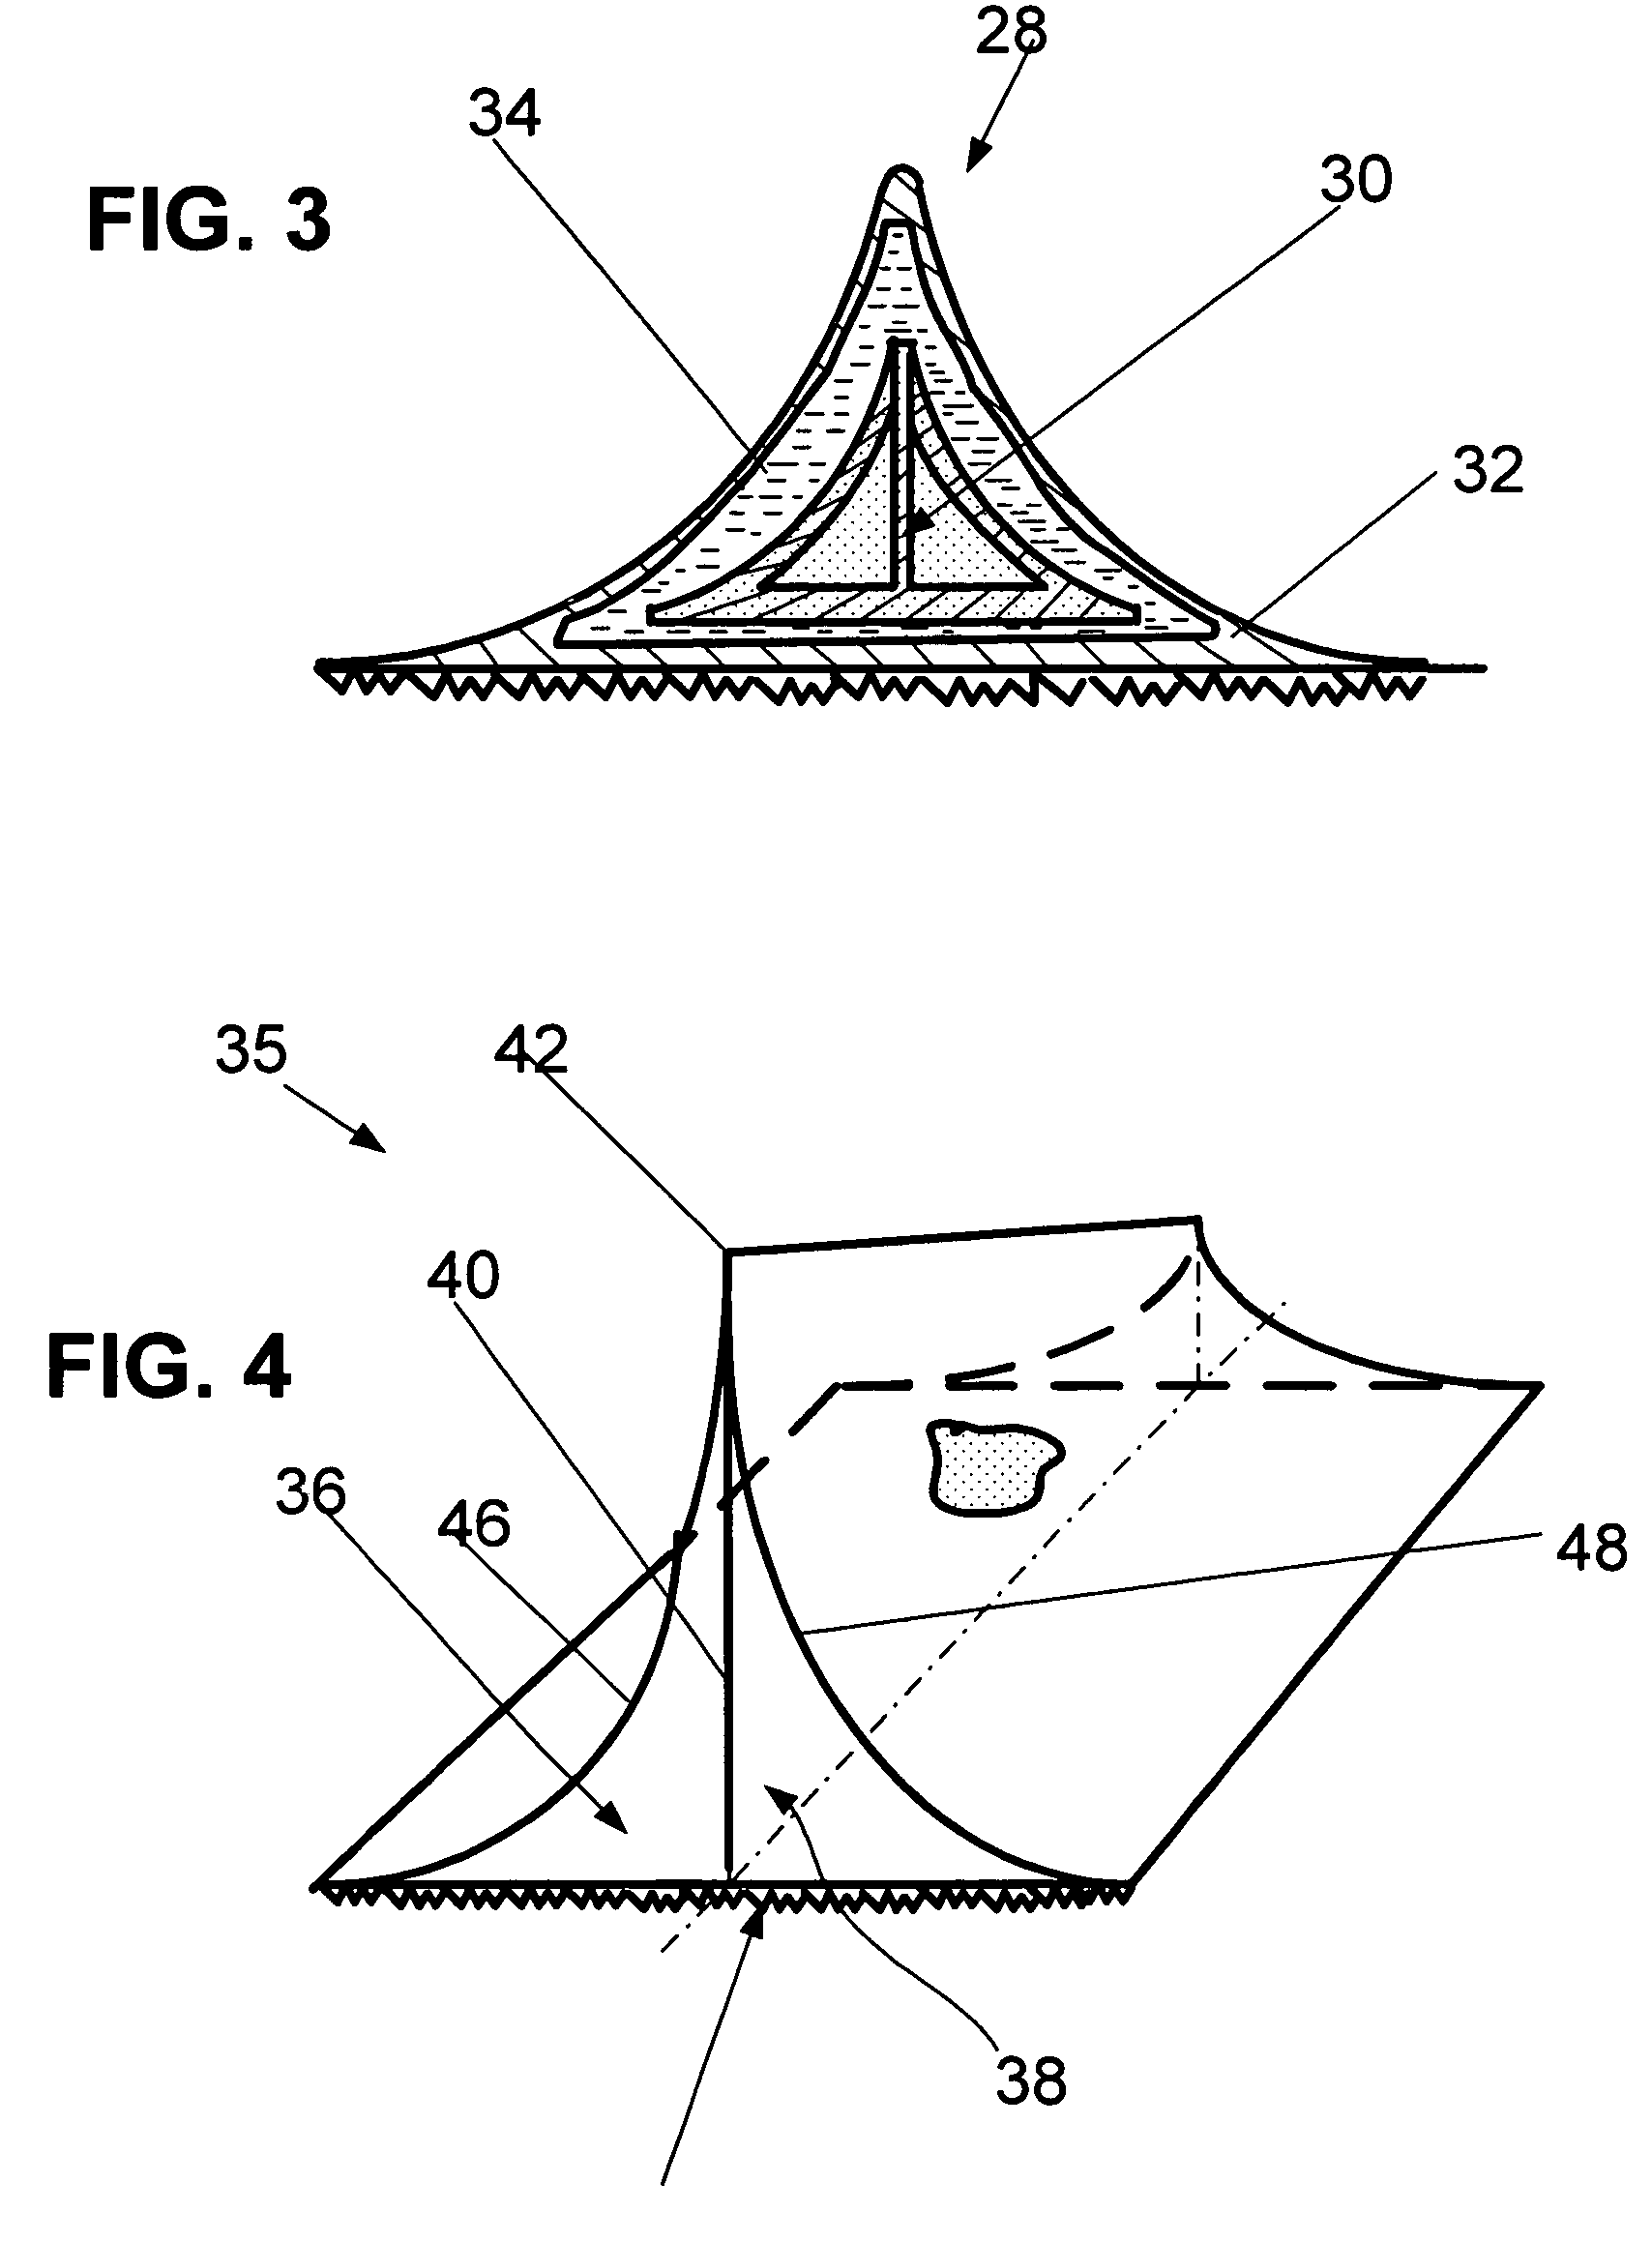 Ergonomic thigh support and method of uniformly distributing pressure on the thigh surface of a seated person